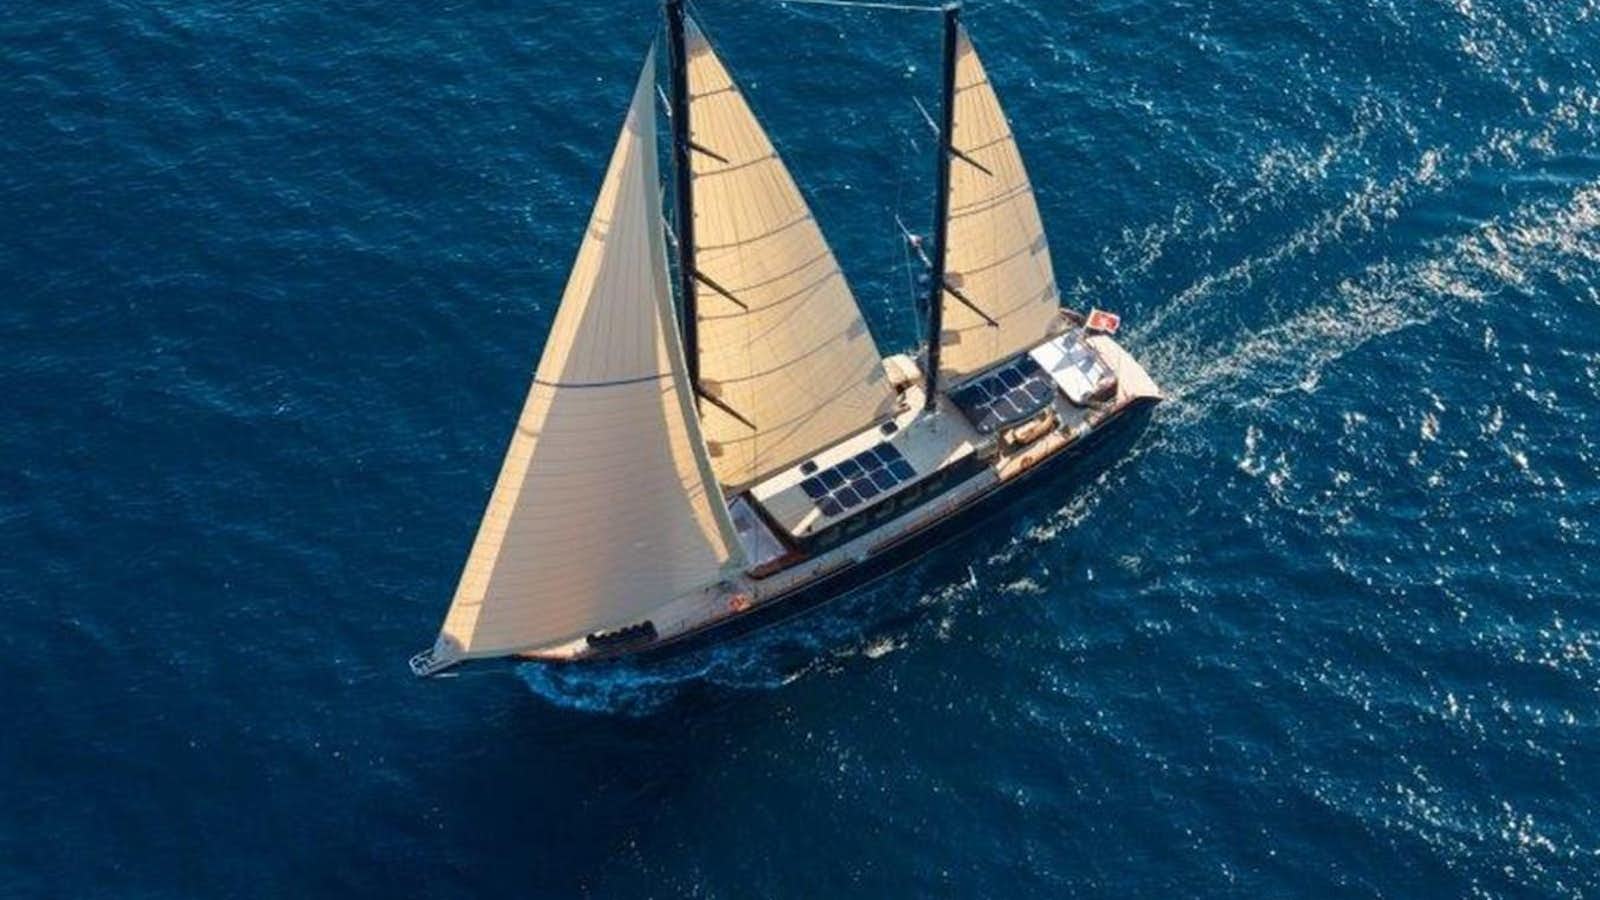 Miti one
Yacht for Sale